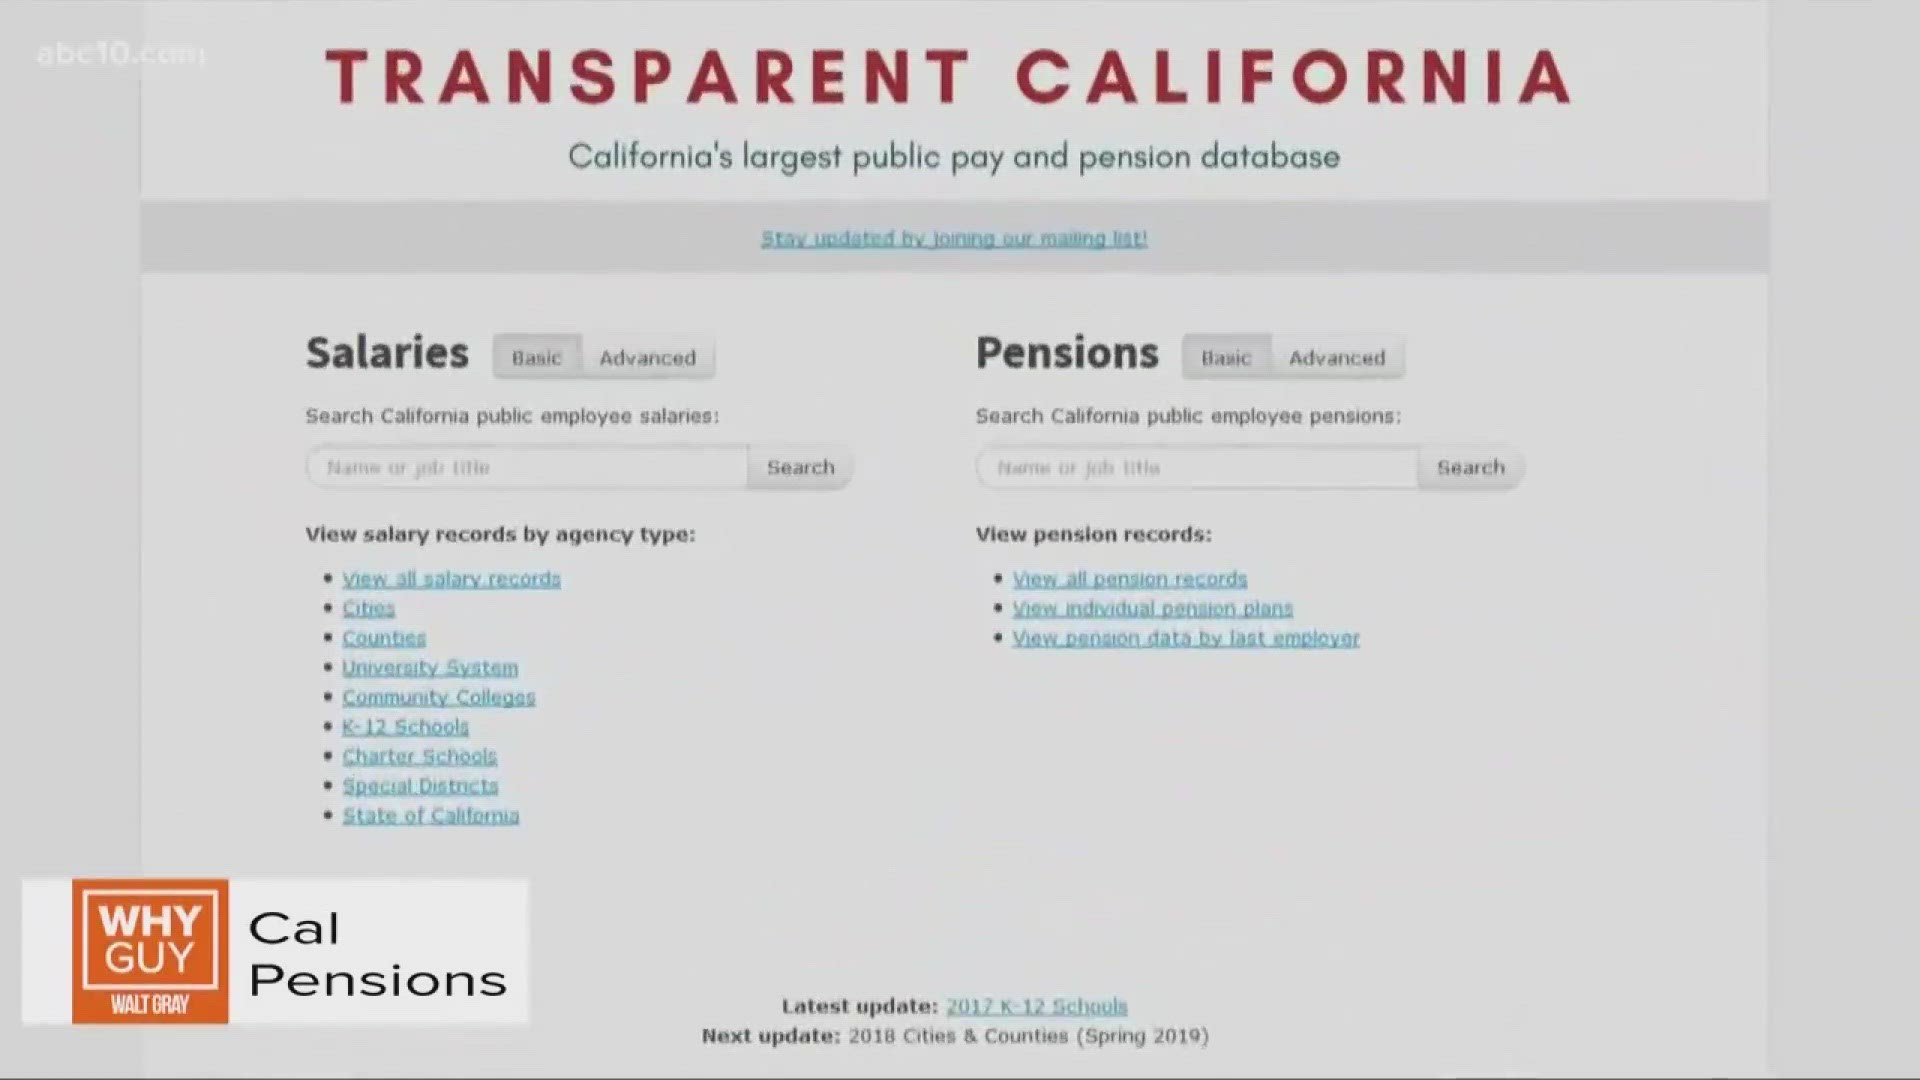 If you want to know what all state employees earn, and their total income packages, it’s easily available online at Transparent California.